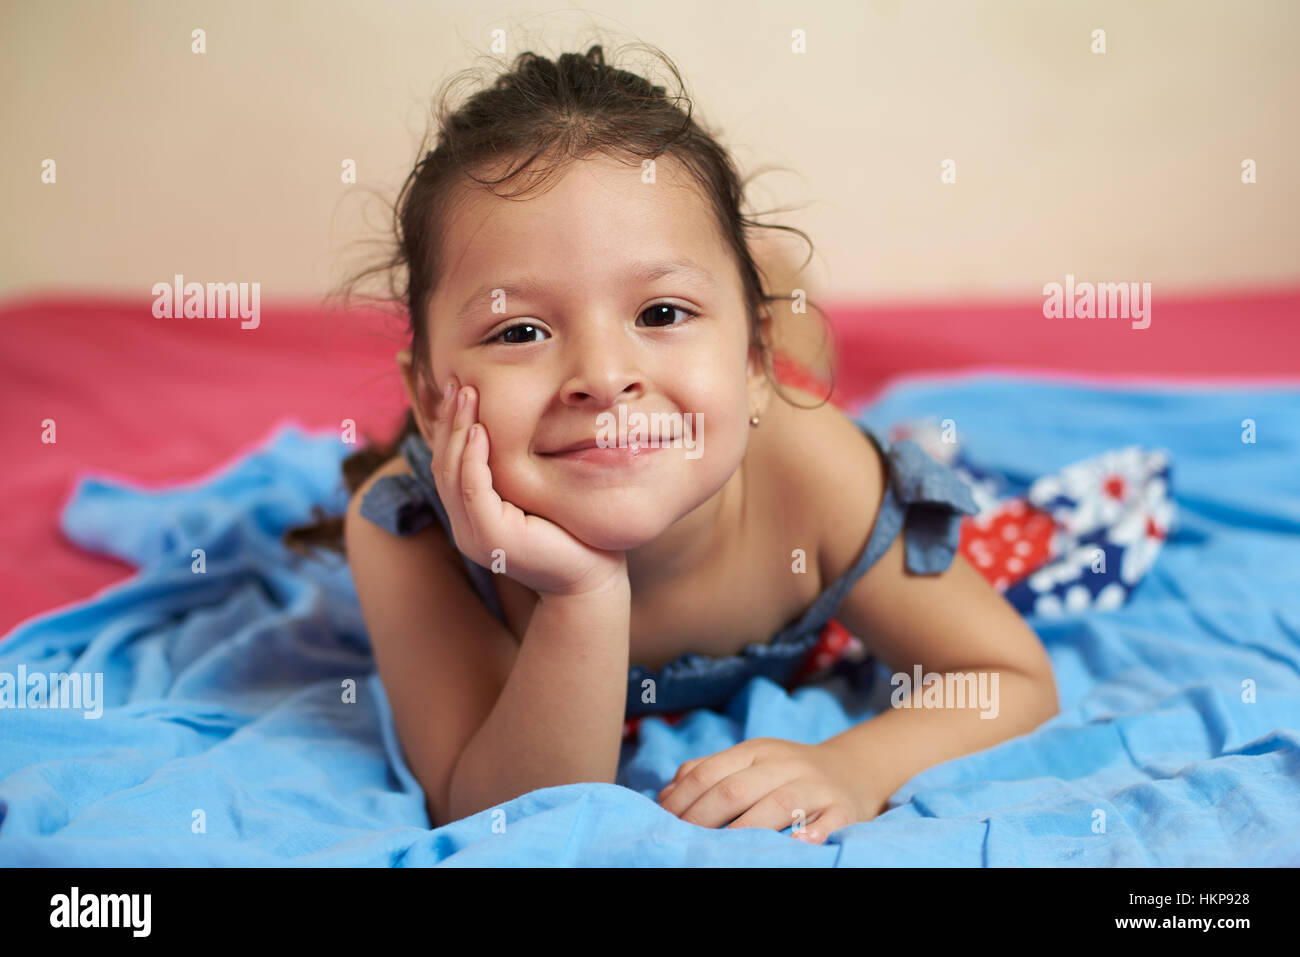 smiling latino girl laying on blue blanket bed Stock Photo